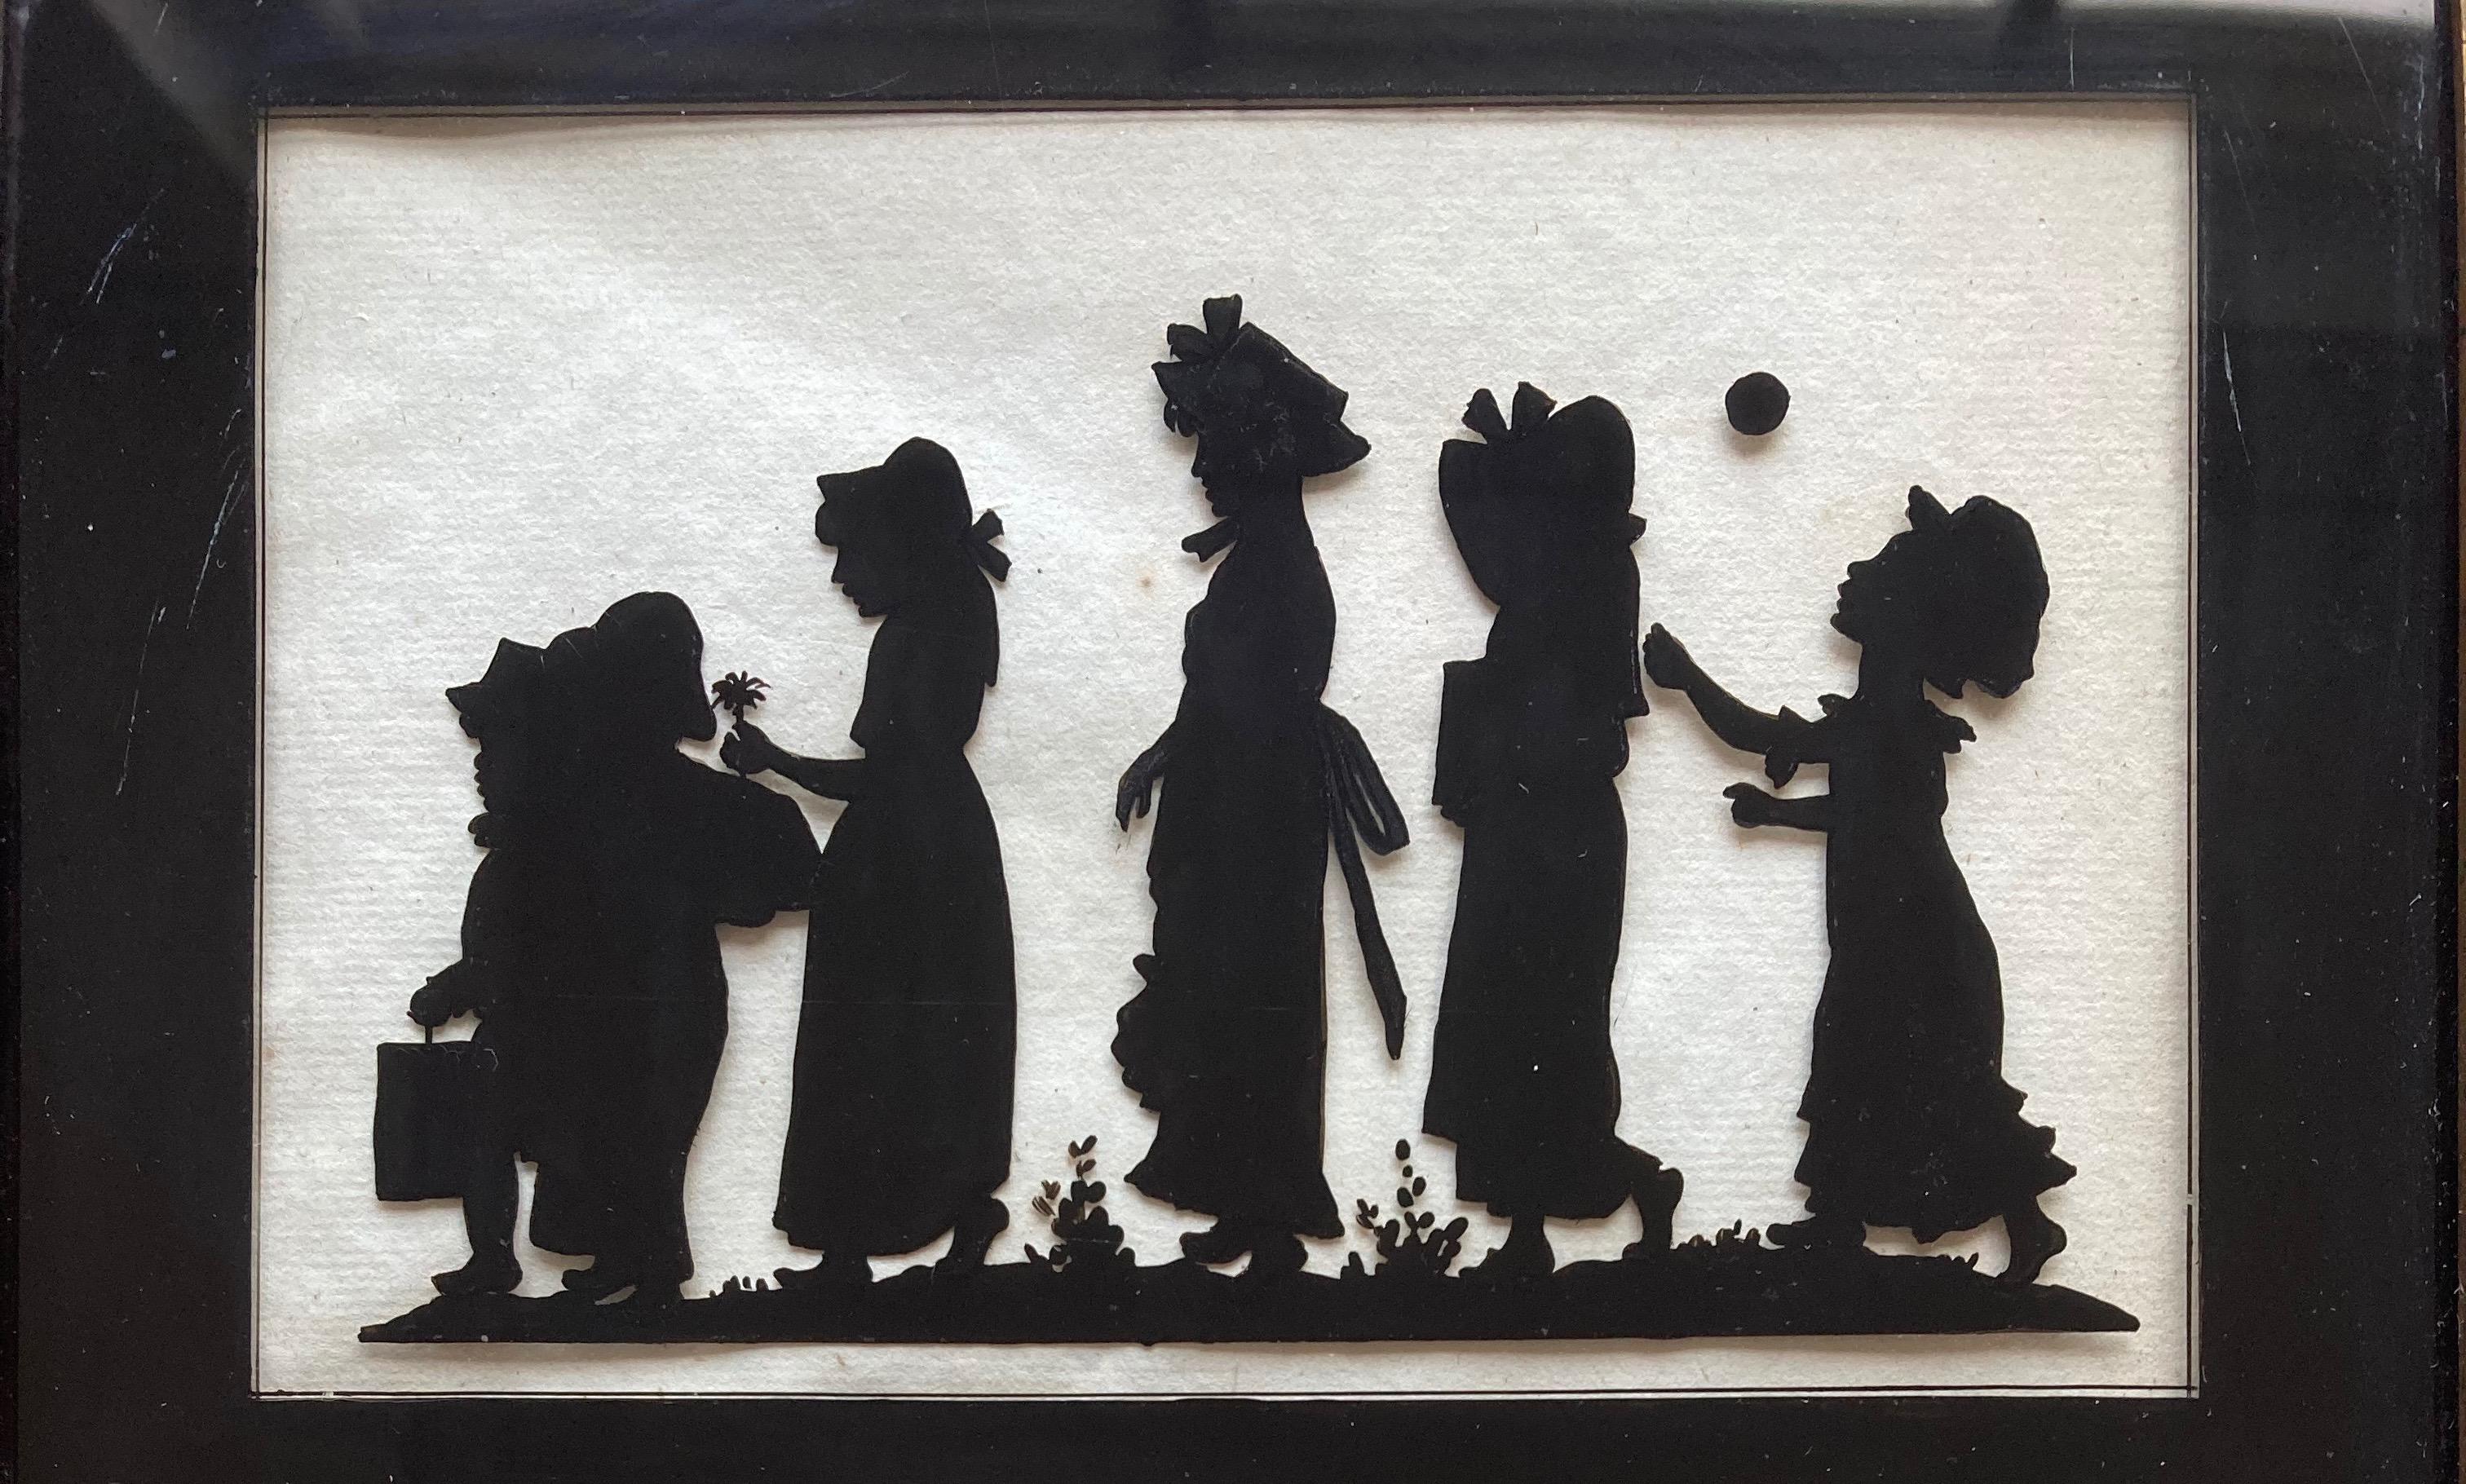 19th Century Antique silhouette of children, reverse painted on glass - Black Portrait by Unknown